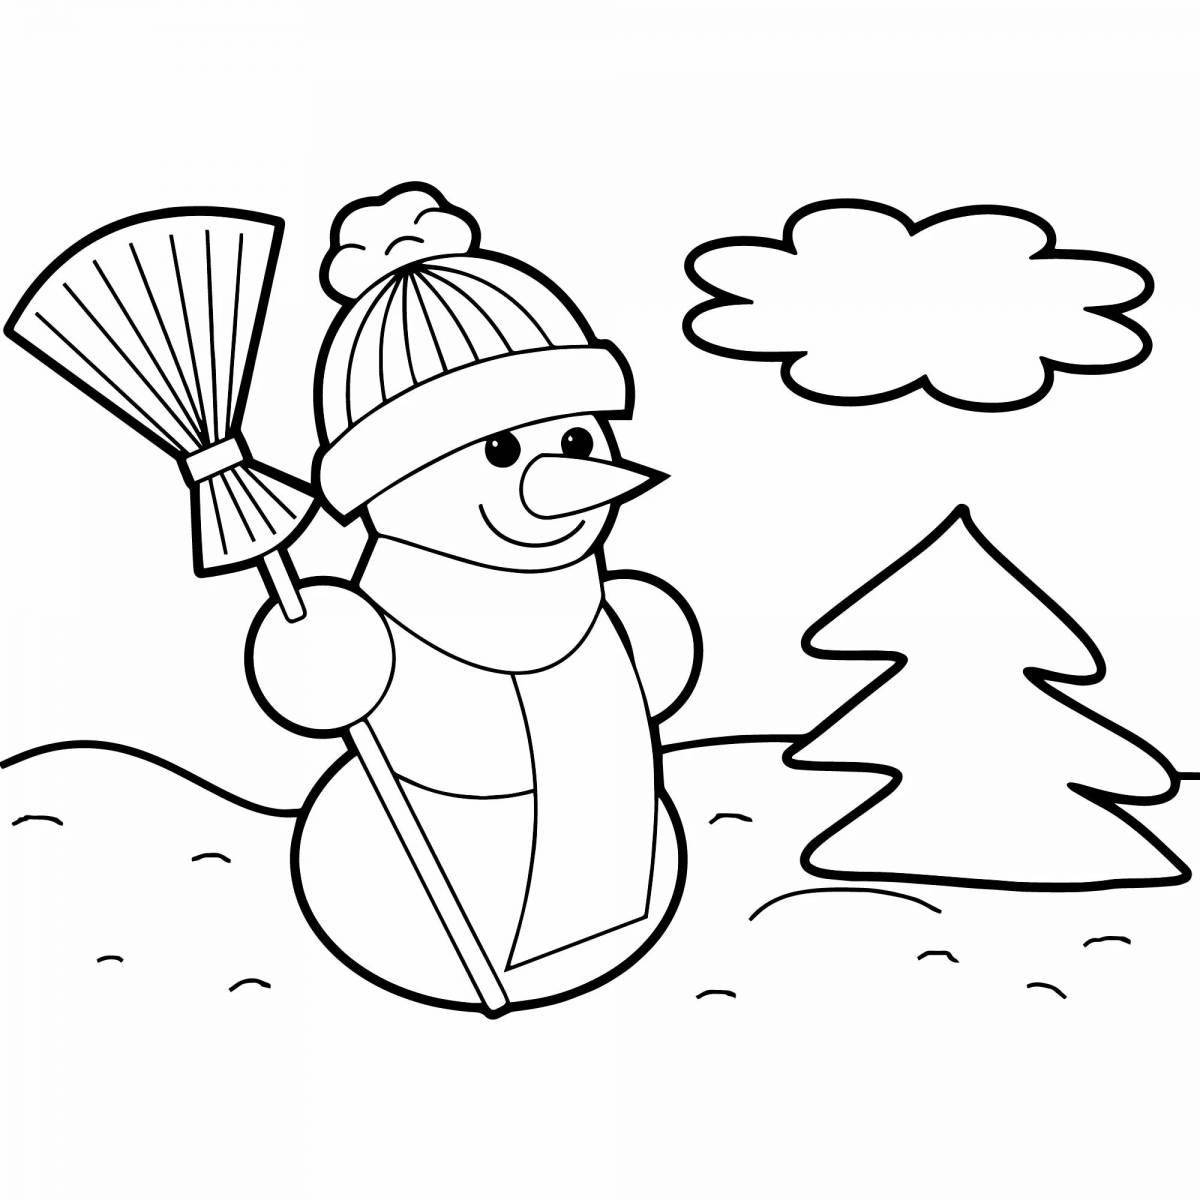 Animated snowman girl coloring book